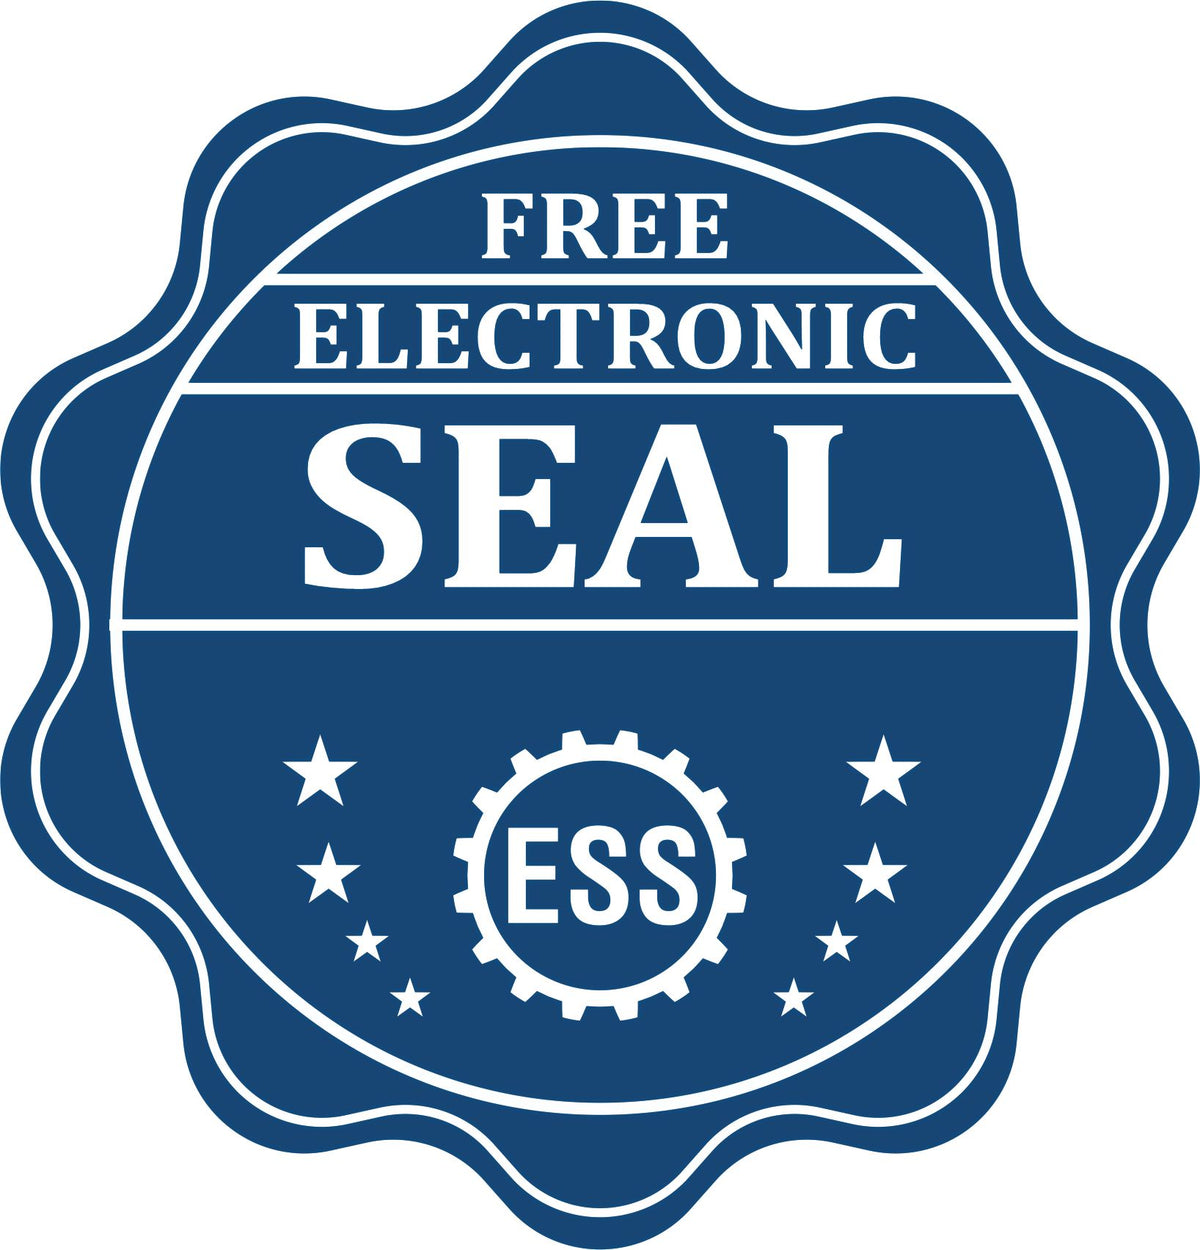 A badge showing a free electronic seal for the Soft Wyoming Professional Engineer Seal with stars and the ESS gear on the emblem.